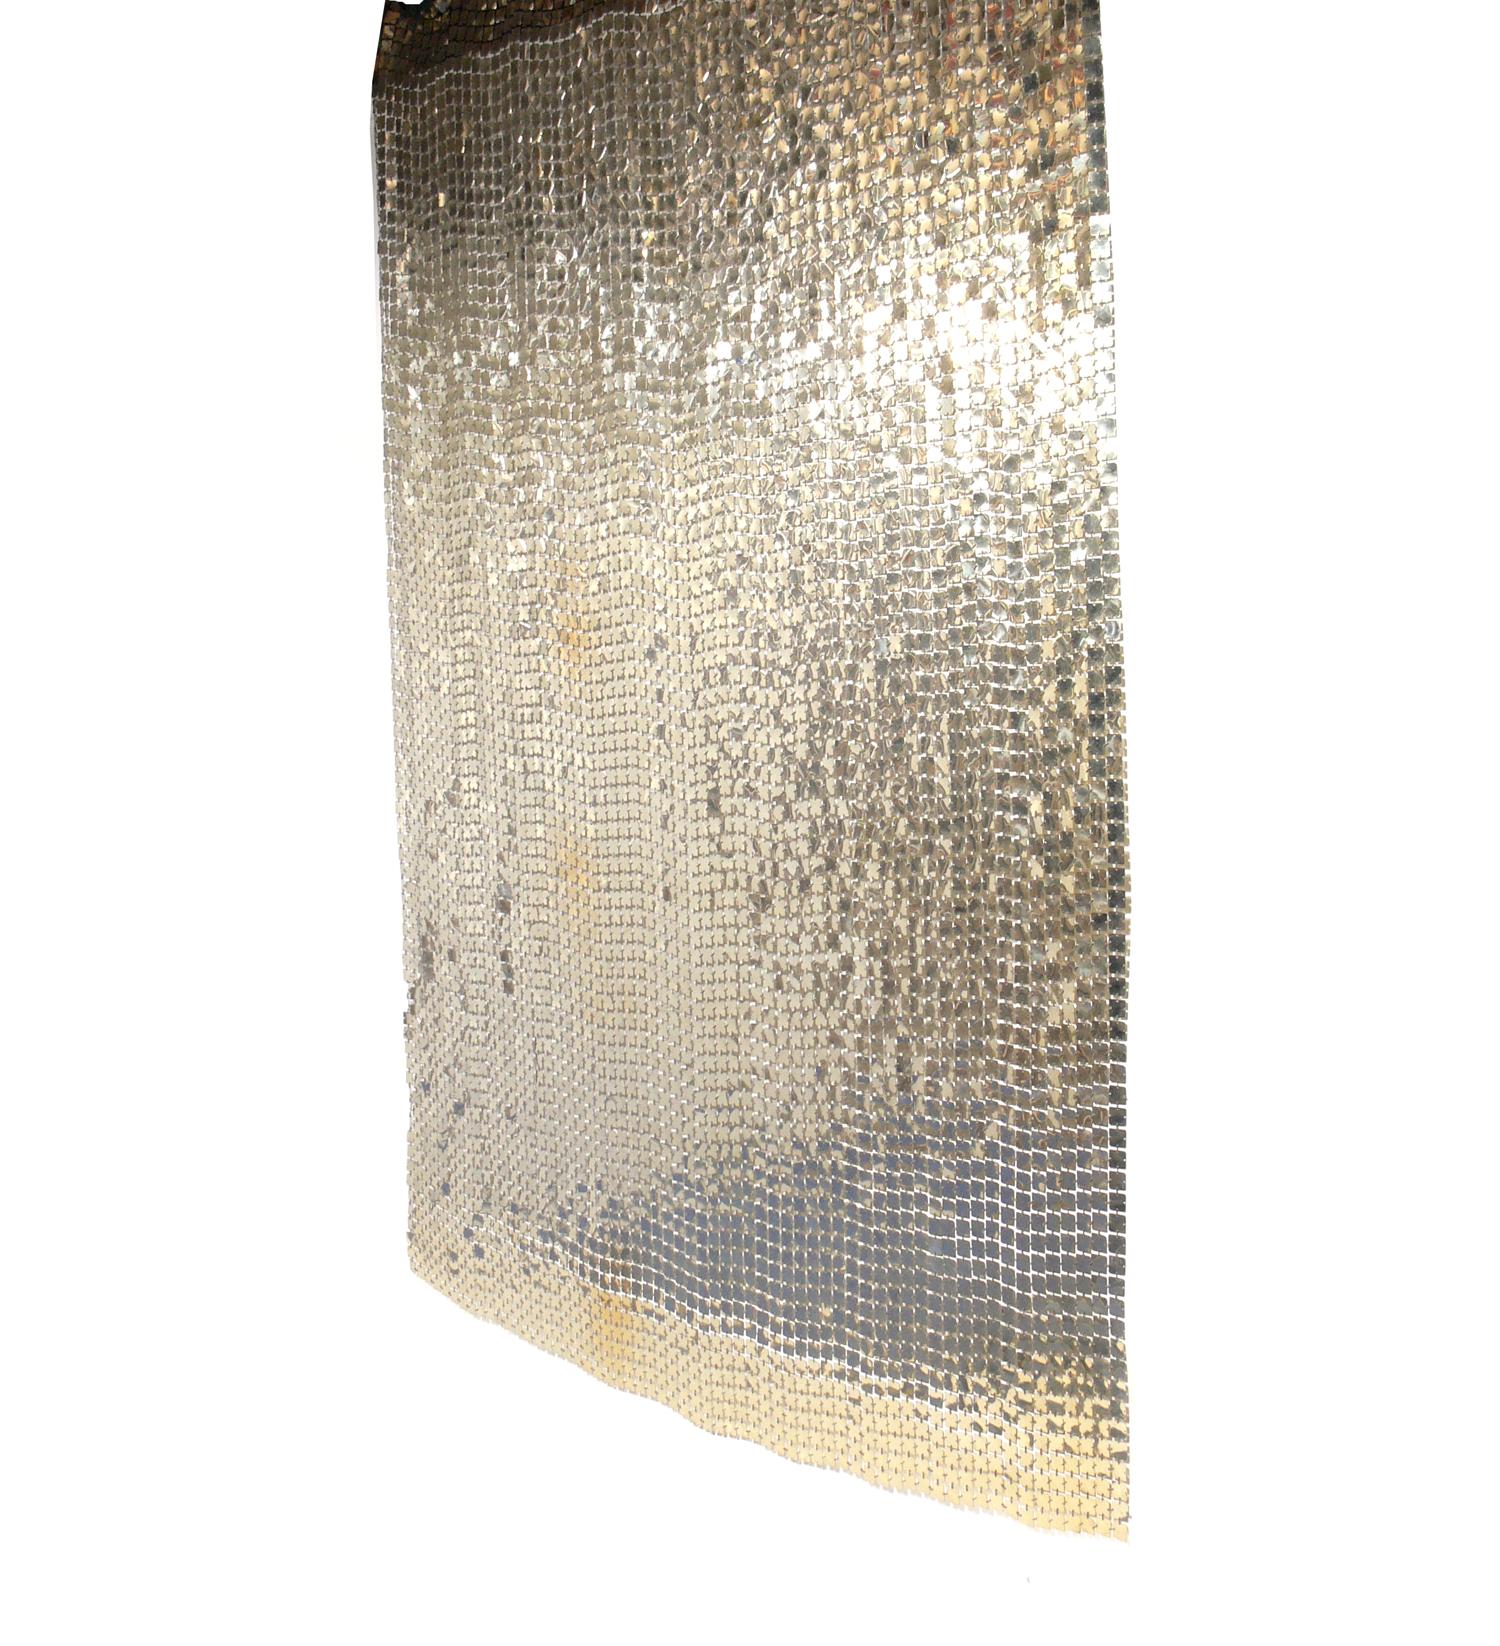 Paco Rabanne Space curtain or room divider, French, circa 1970s. It has a wonderful patinated aluminum color that looks more platinum or champagne color in certain light. Looks incredible when lit, as the discs reflect the light and gently move with